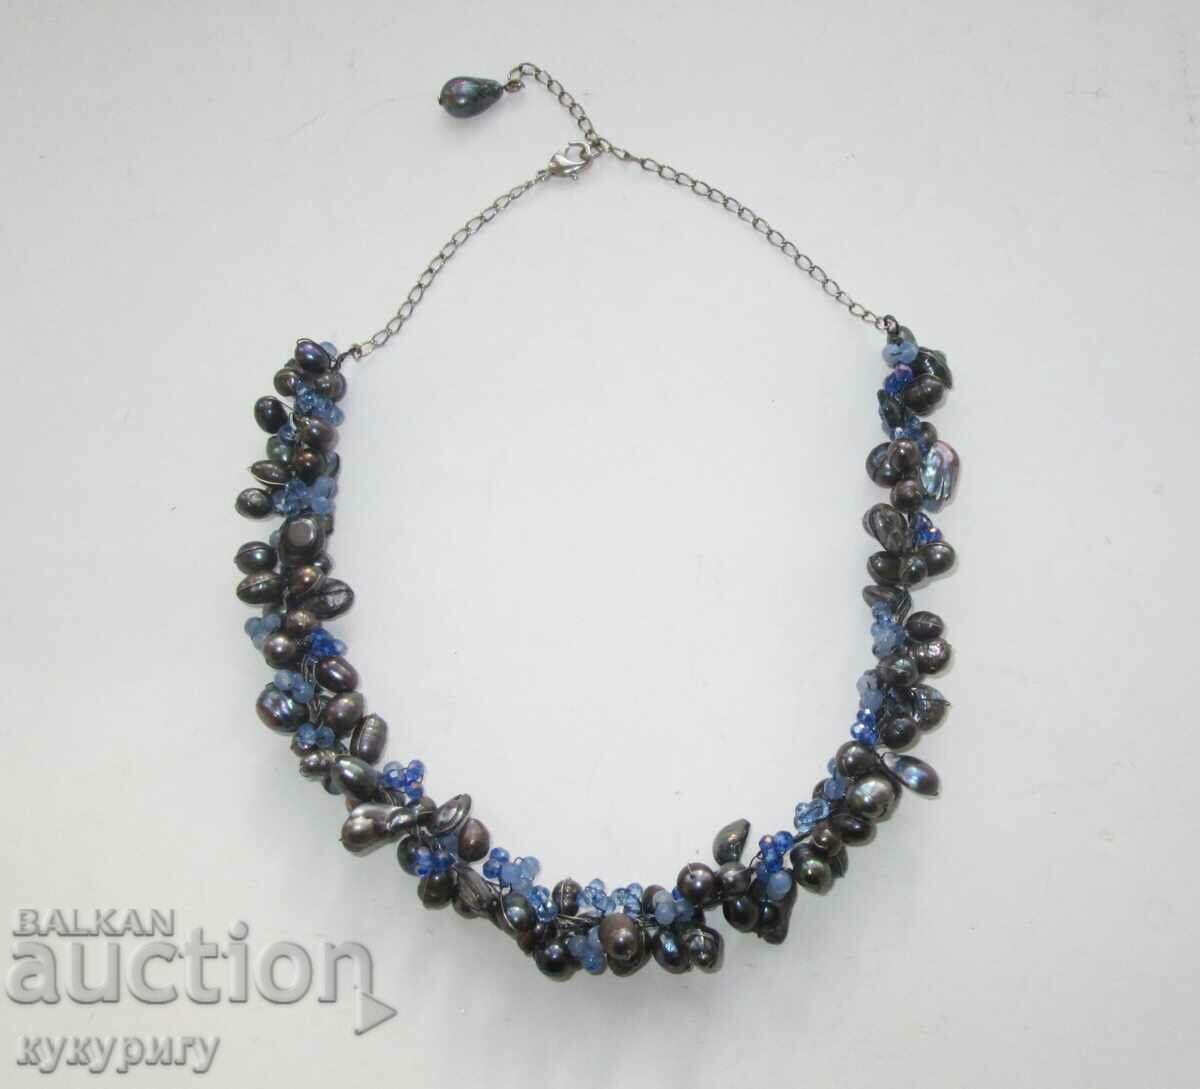 Women's jewelry necklace with natural black pearls